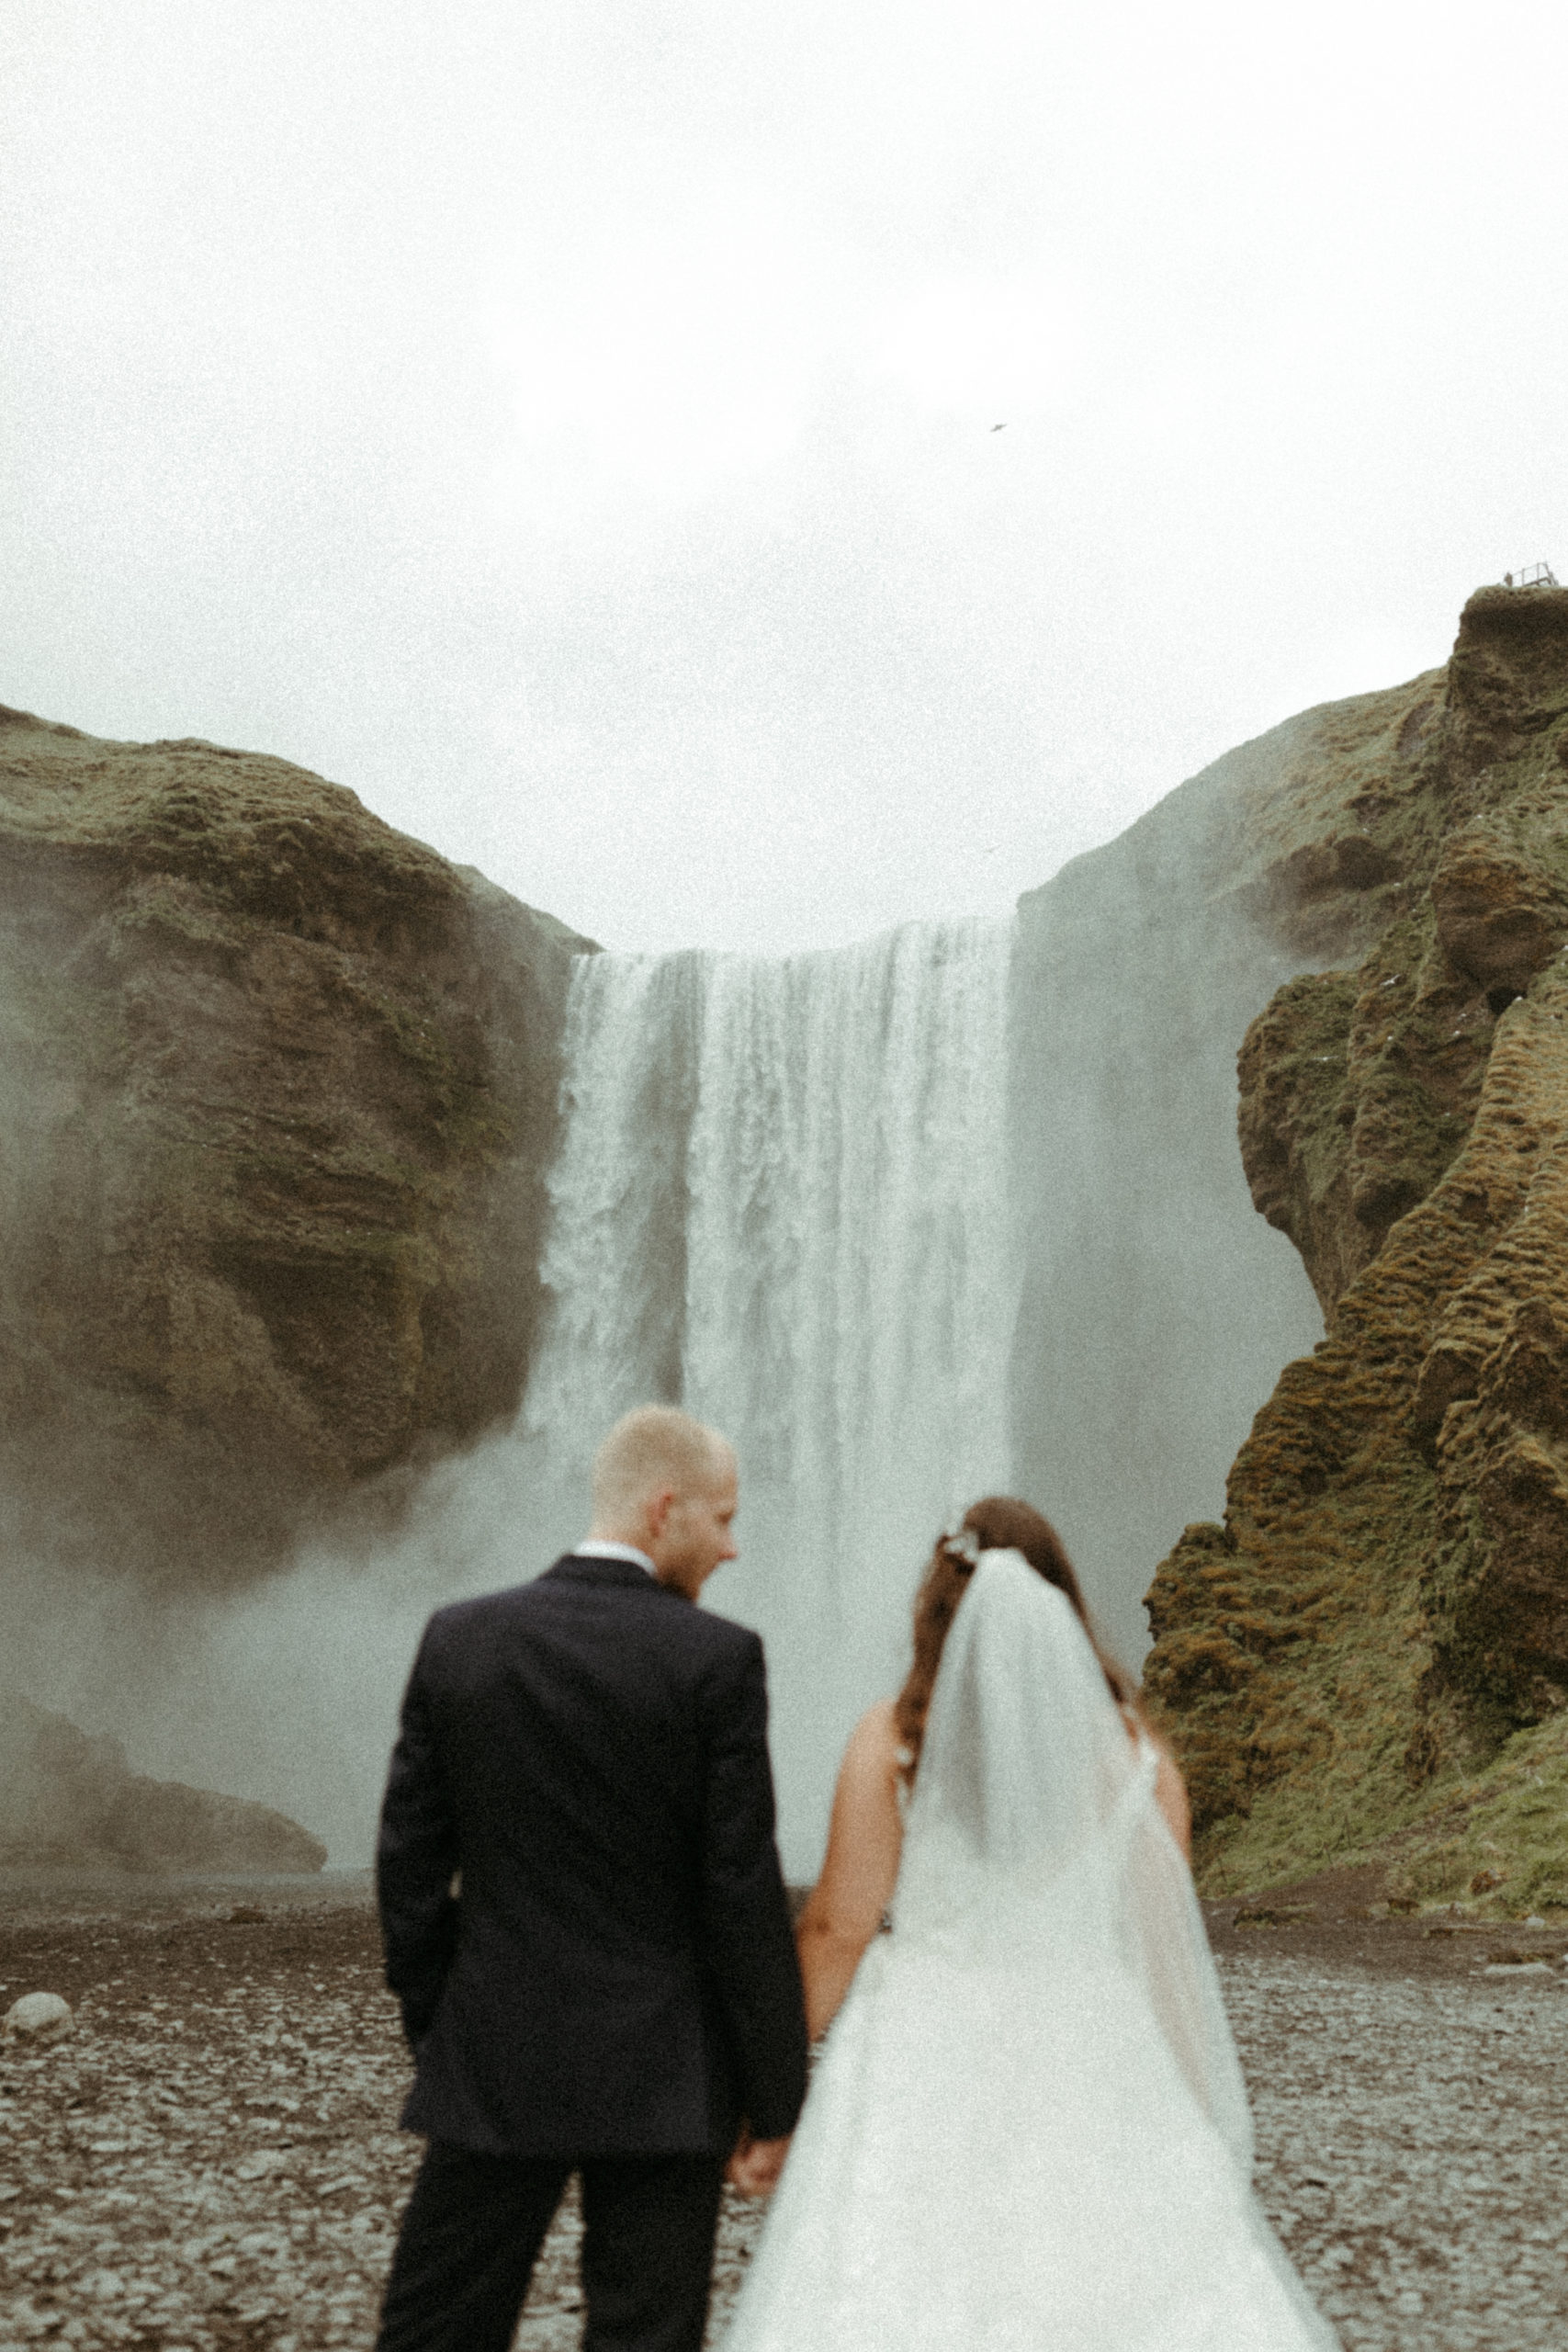 Bride and groom standing in front of Skogafoss waterfall in Iceland on wedding day.